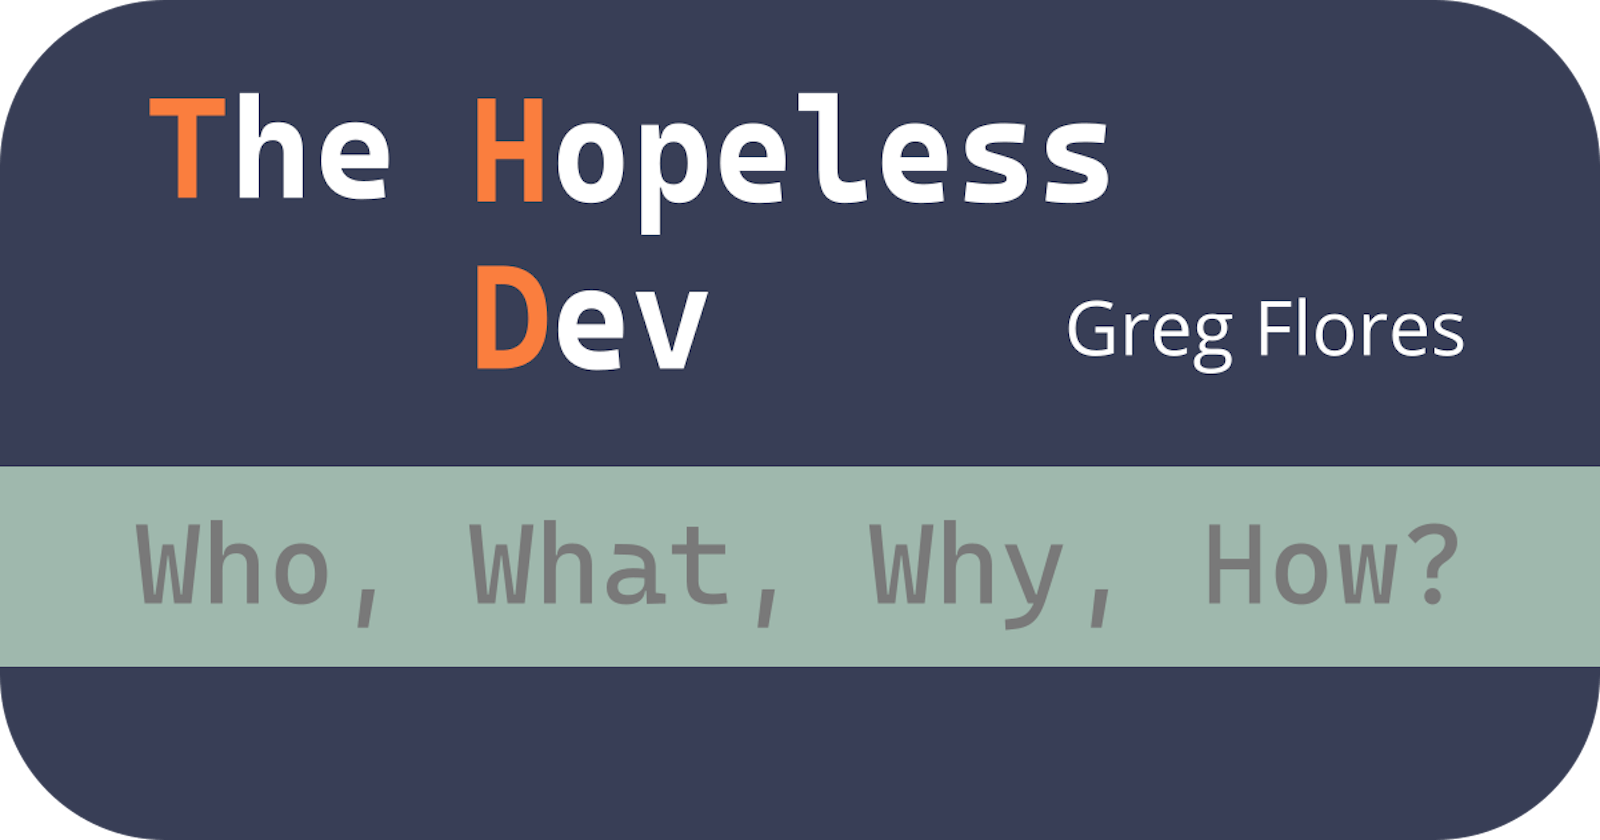 Who, What, Why, How “The Hopeless Dev”?